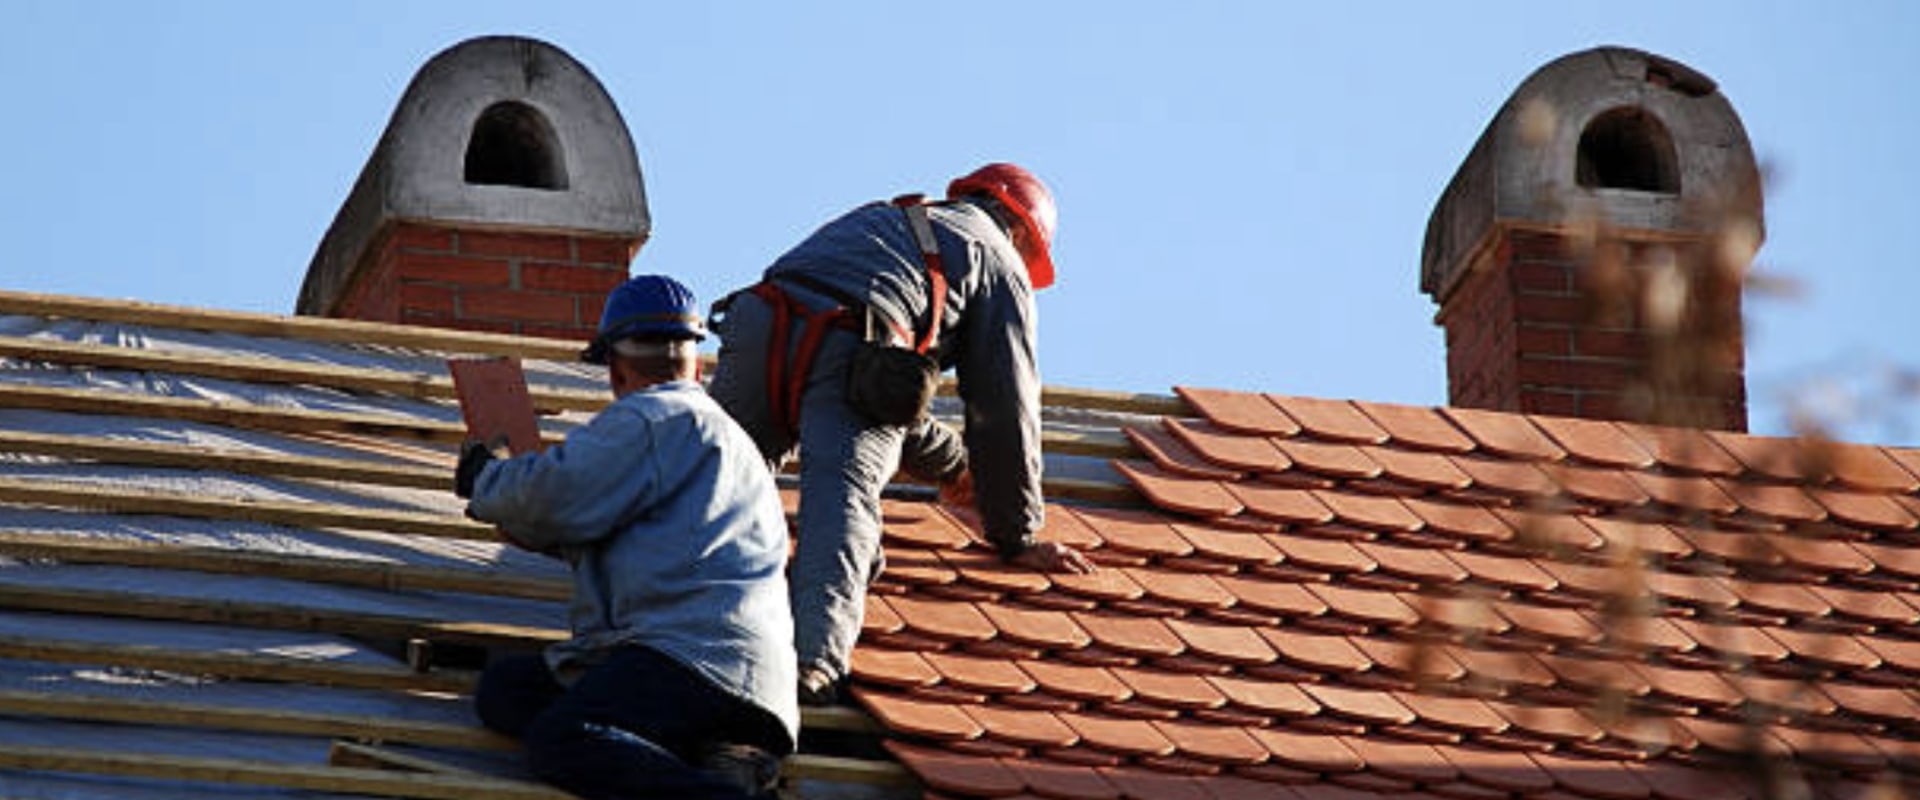 What are the pros and cons of being a roofer?